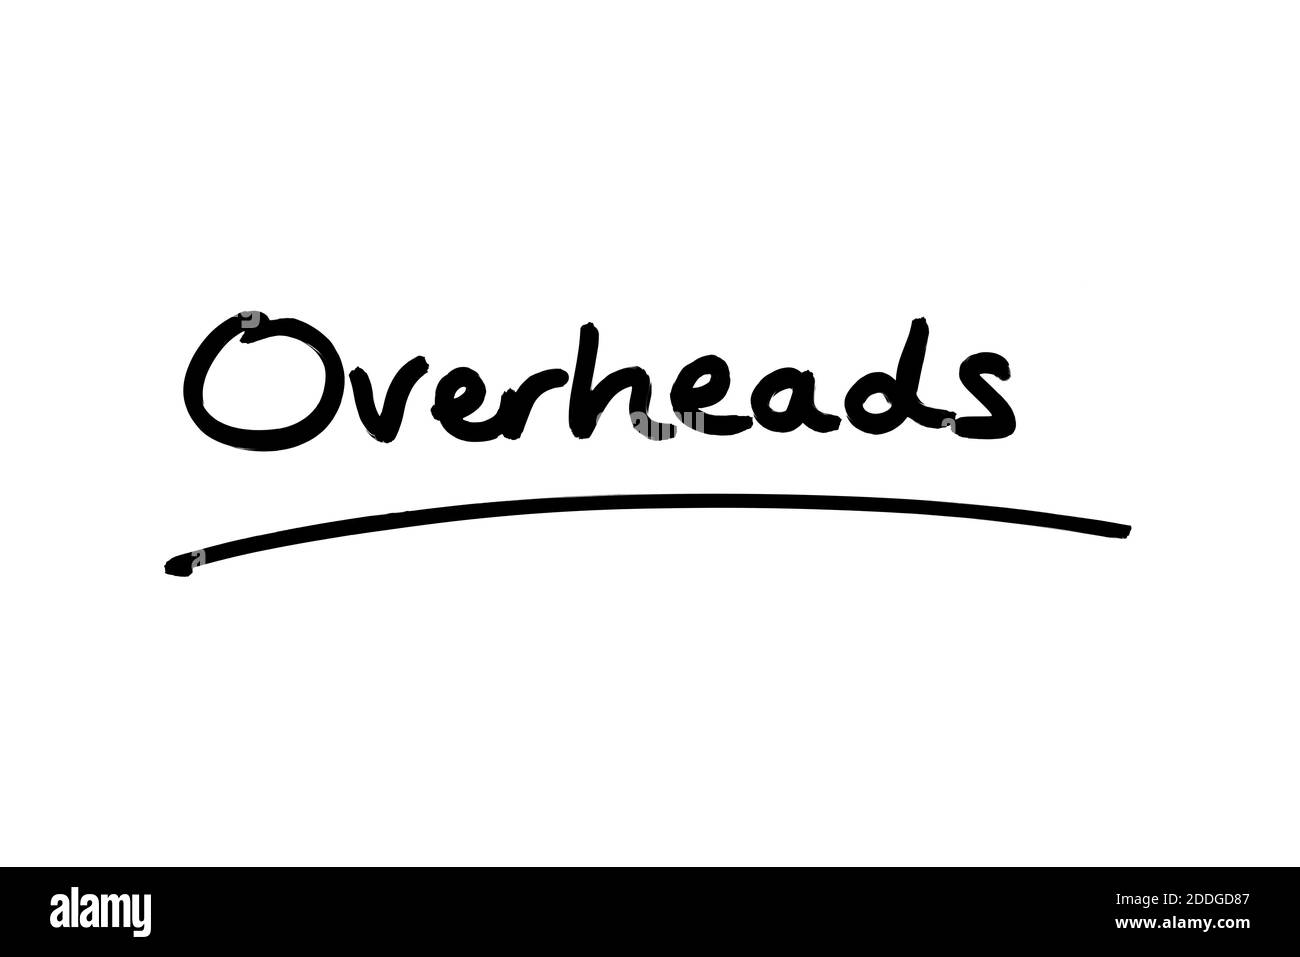 The word Overheads handwritten on a white background. Stock Photo